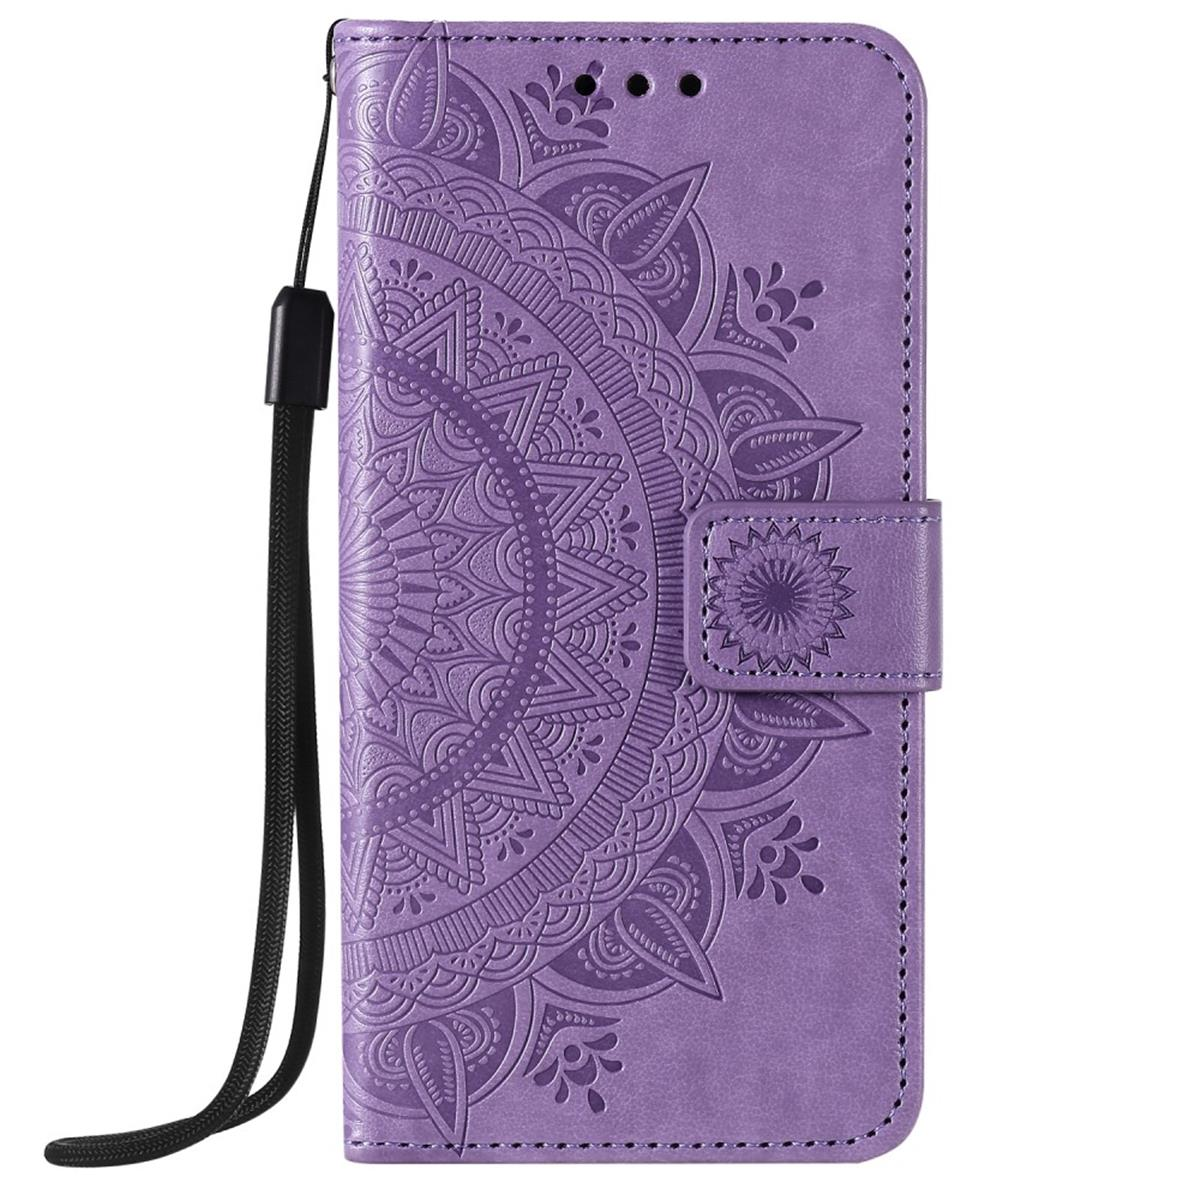 Apple, Pro Bookcover, Max, Muster, Lila Mandala COVERKINGZ iPhone Klapphülle mit 12